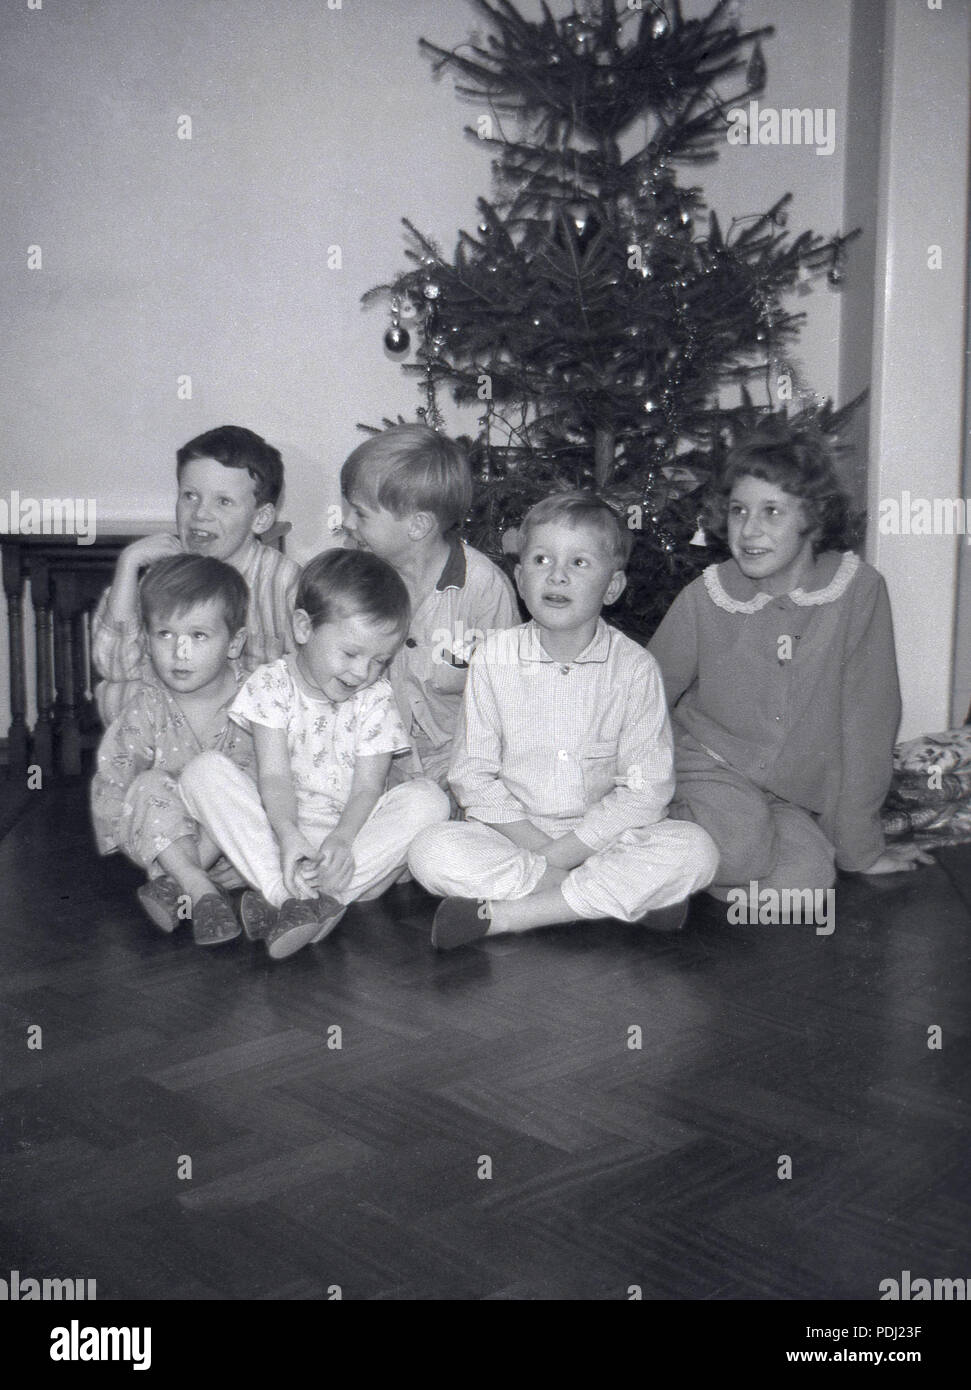 1960s, excited young chiildren sit on a wooden floor of a room at Christmas in their pyjamas and slippers infront of a decorated Xmas tree, awaiting their presents, England, UK. Stock Photo